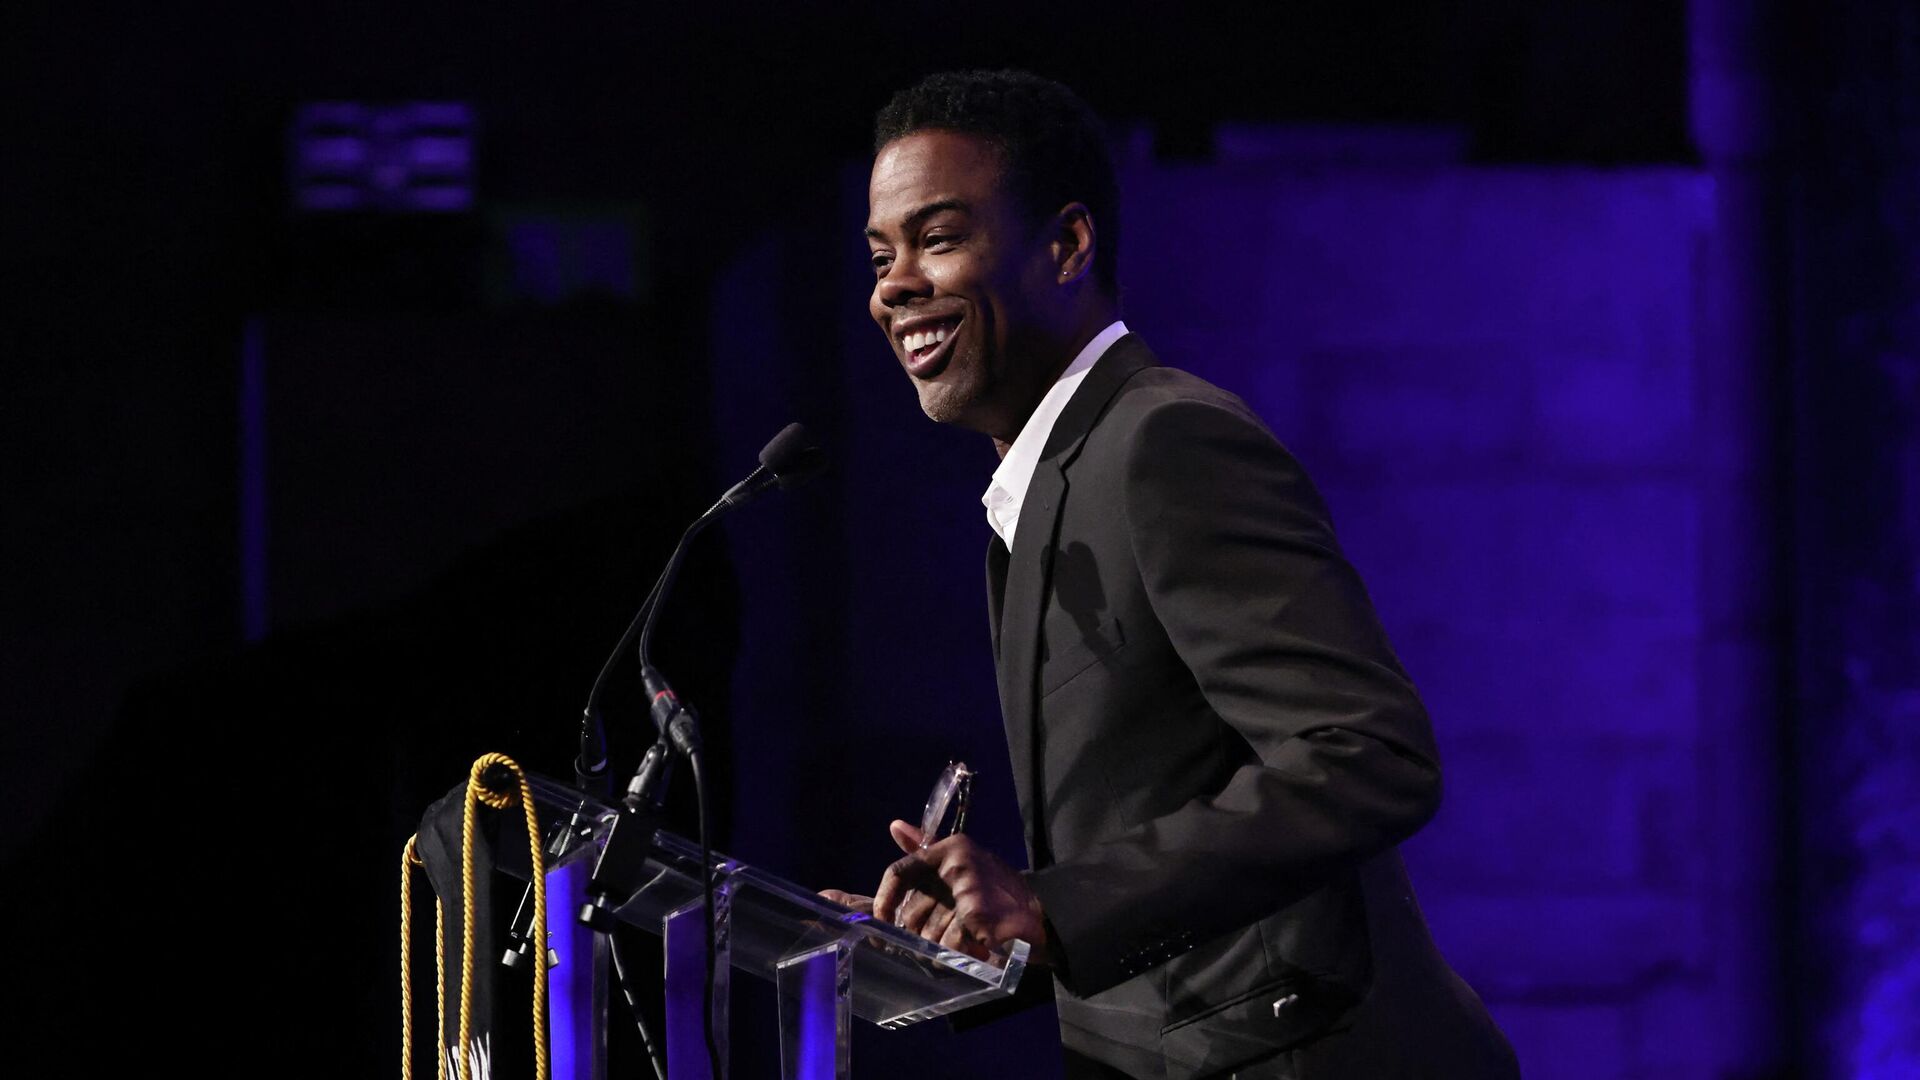 Chris Rock speaks onstage at the National Board of Review annual awards gala at Cipriani 42nd Street on March 15, 2022 in New York City. - Sputnik International, 1920, 15.05.2022